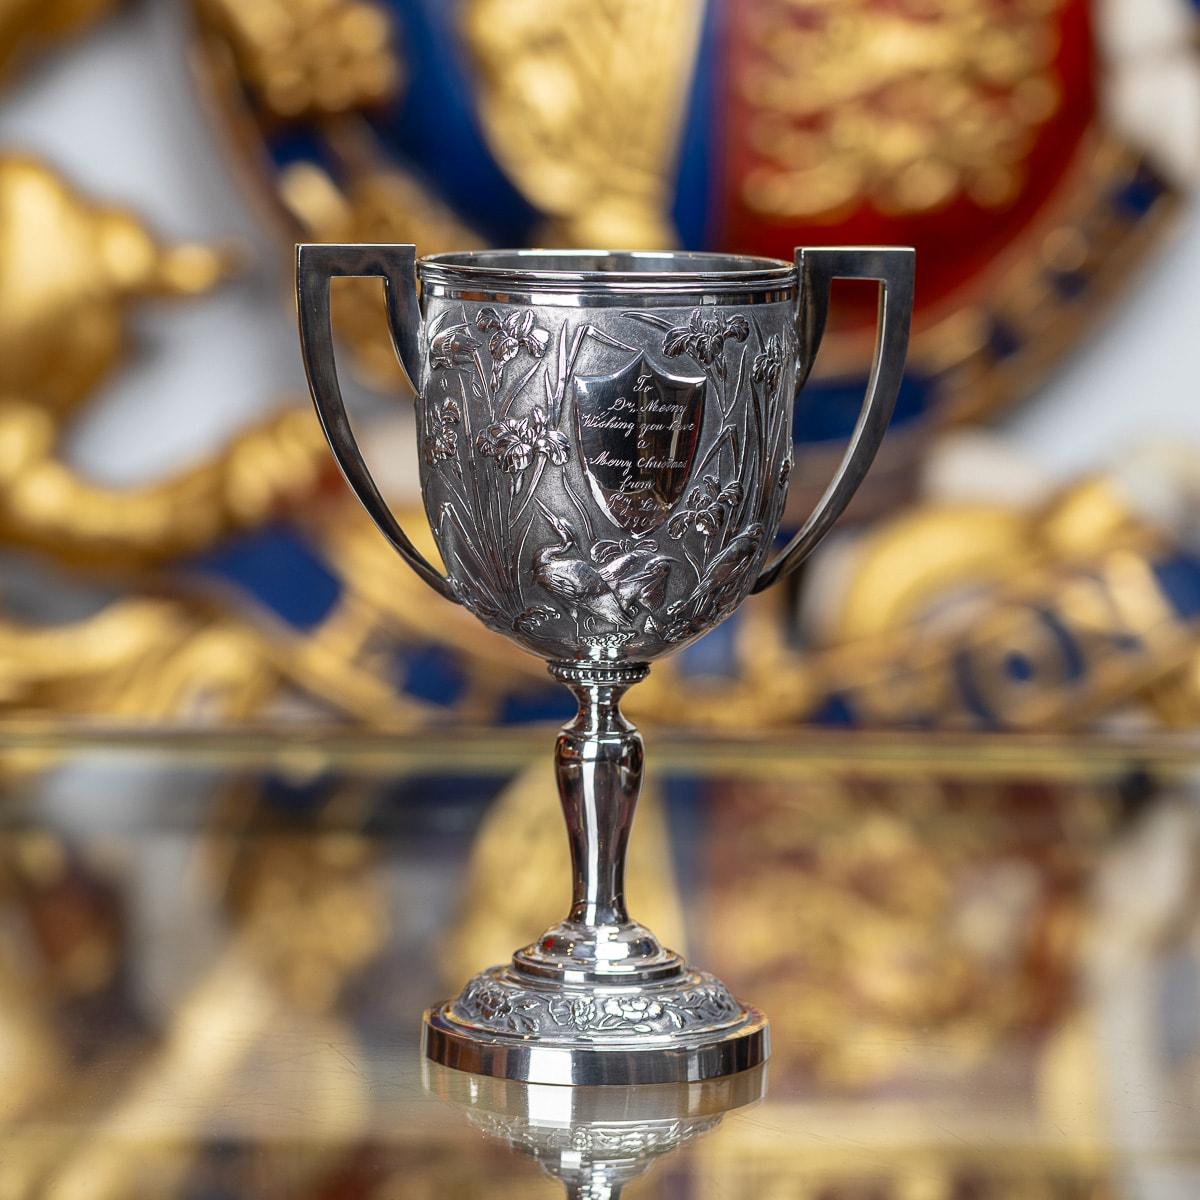 Antique early 20th Century Chinese export solid silver trophy cup, impressive and exceptionally fine quality, decorated with iris and perched exotic birds against a hand chased matted ground, cup resting on an elegant shaped stem and turned domed